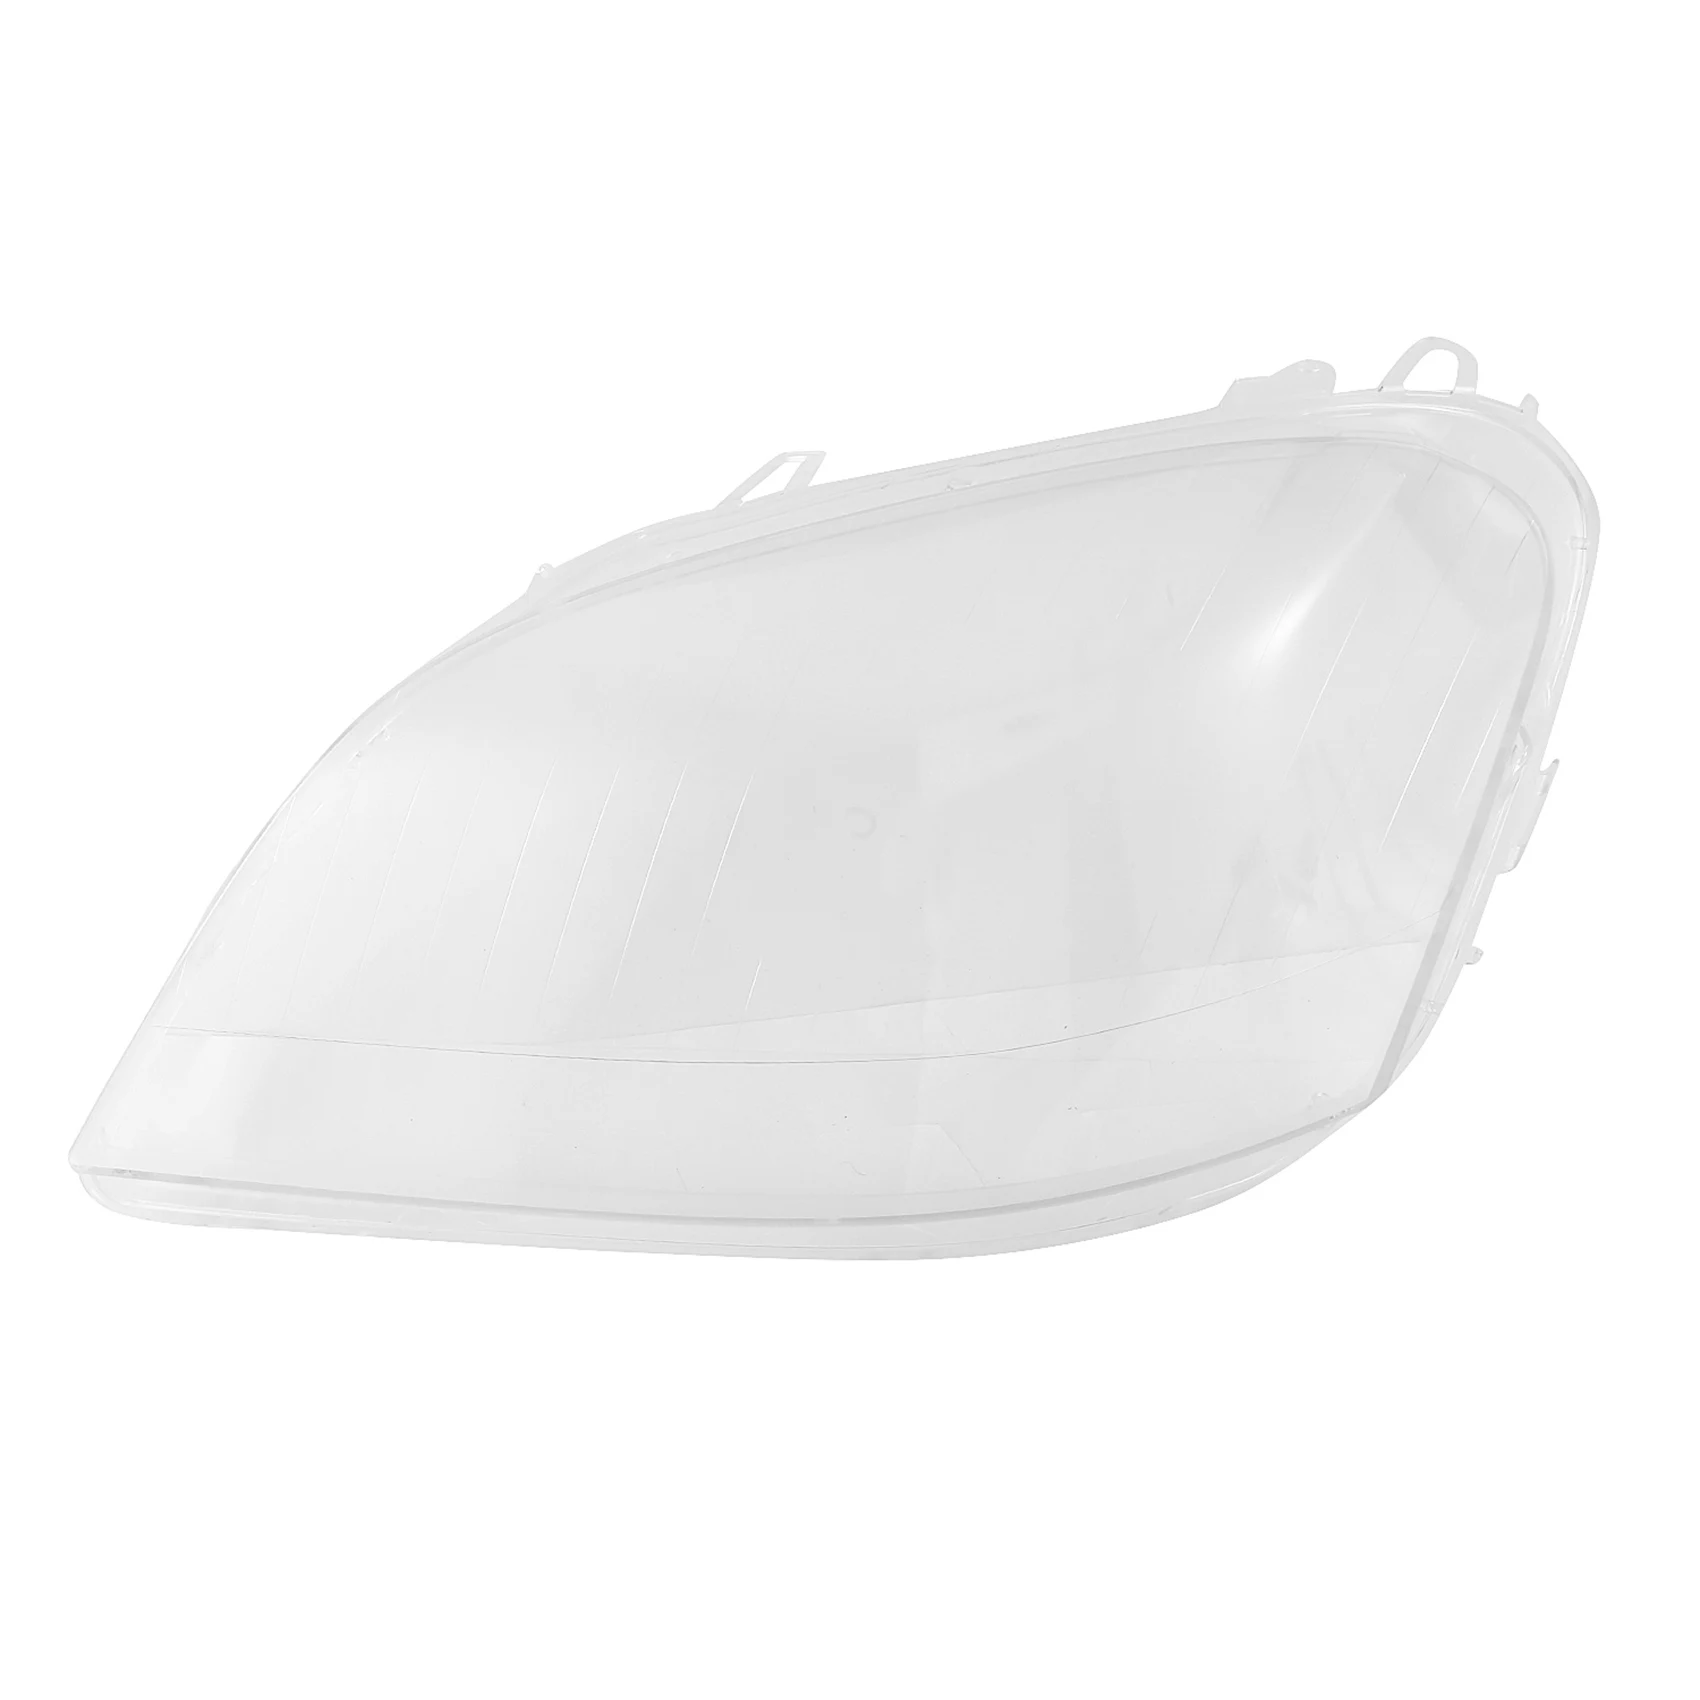 

for Mercedes-Benz W164 ML350 500 2005-2008 Left Side Headlight Lens Cover Head Light Transparent Lampshade Shell Glass